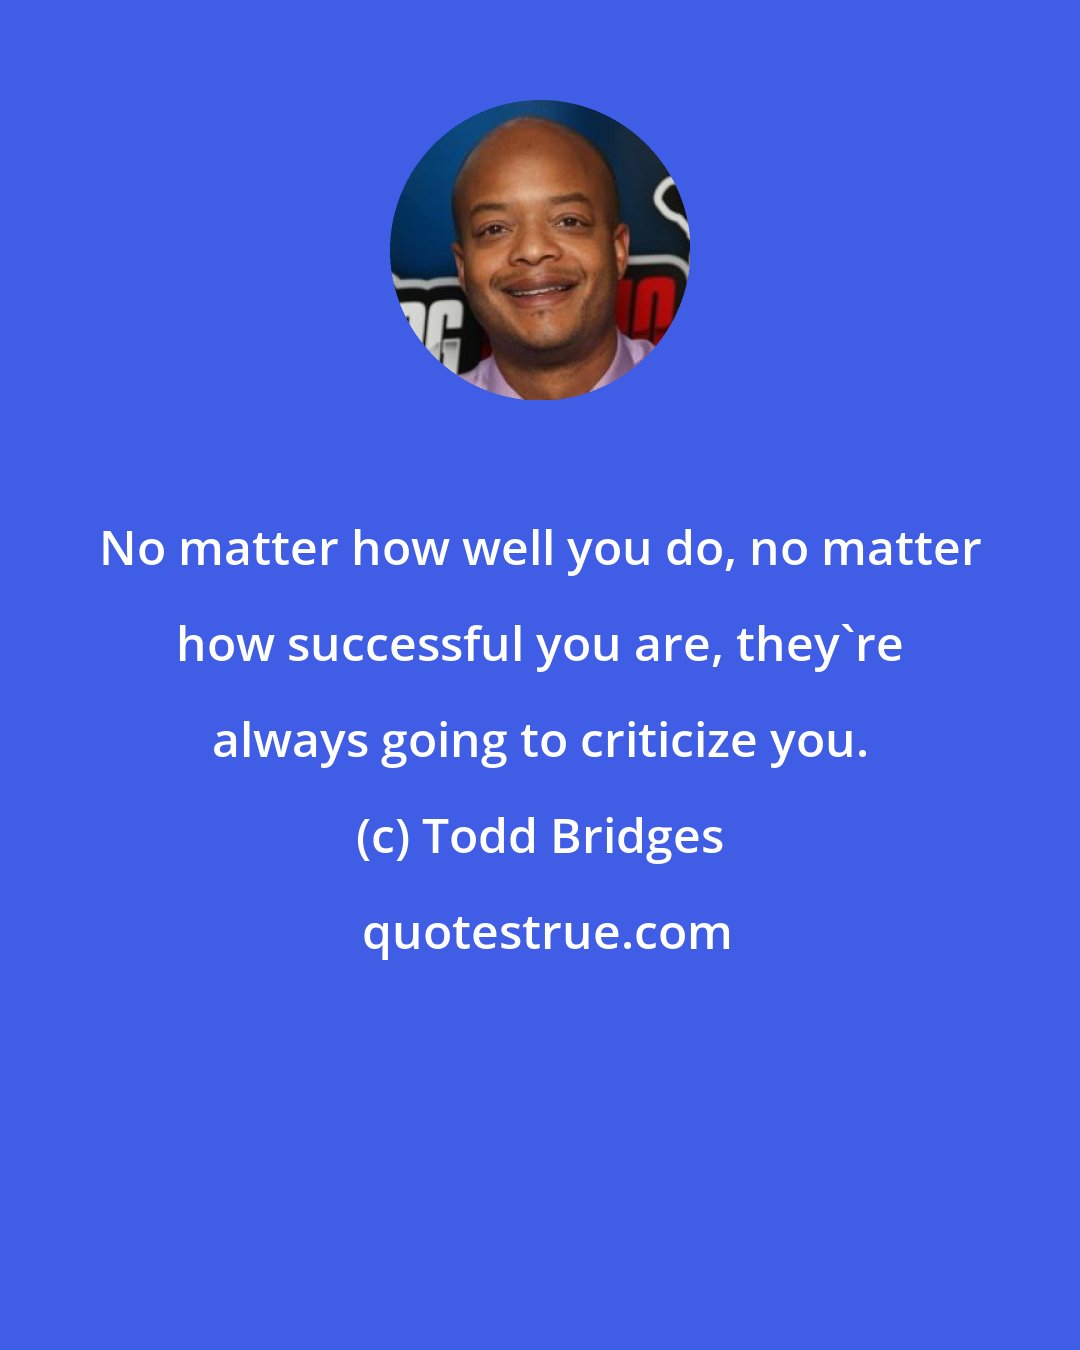 Todd Bridges: No matter how well you do, no matter how successful you are, they're always going to criticize you.